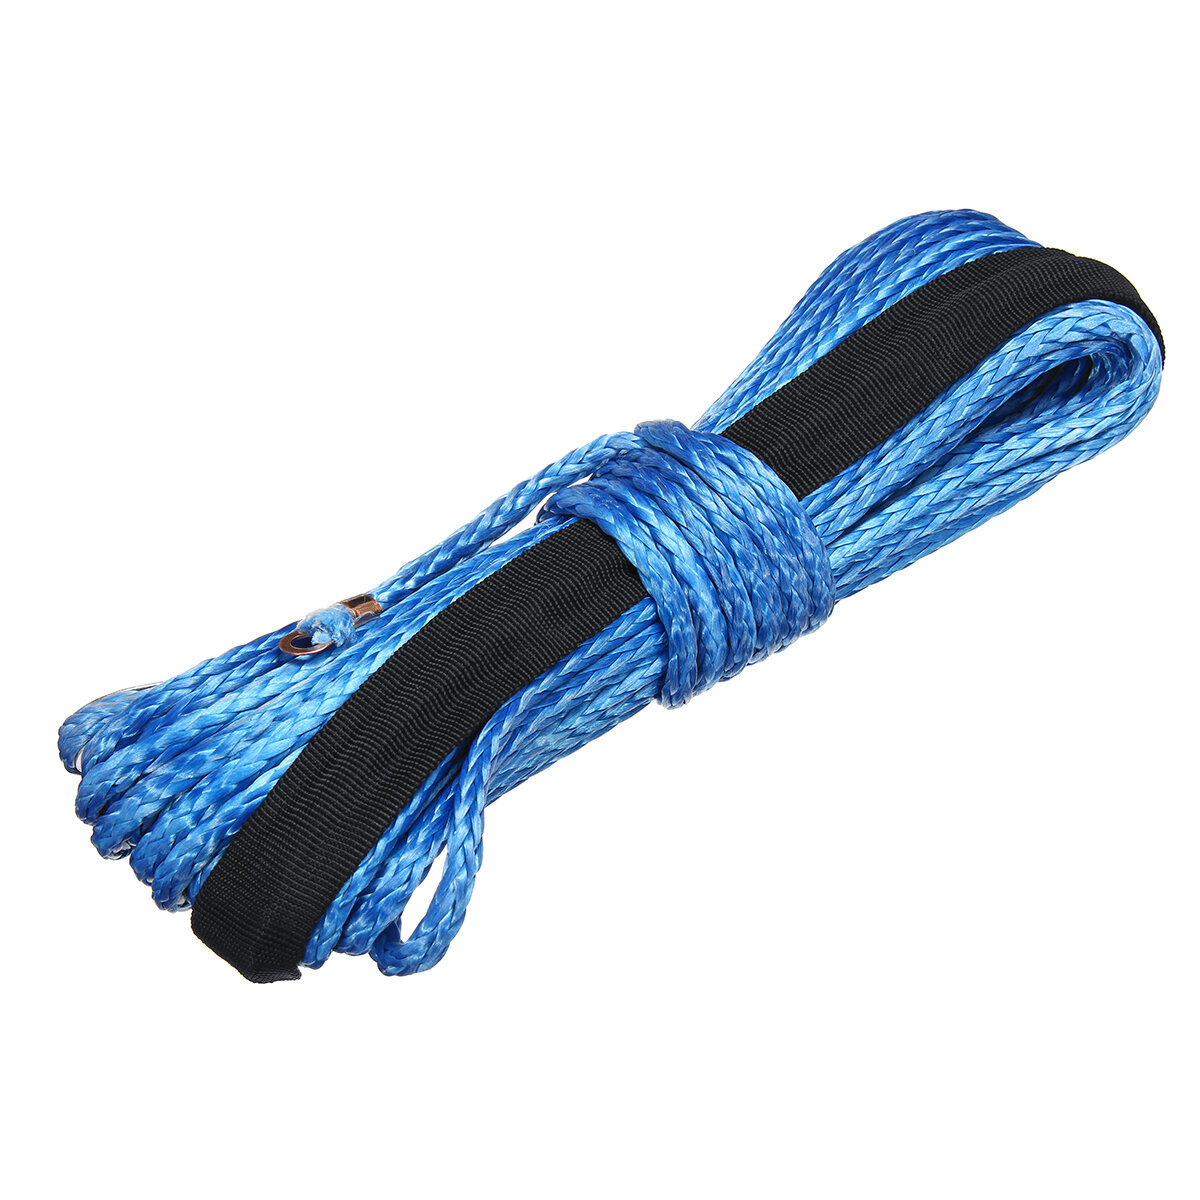 

15m 5500LBs Winch Rope String Line Cable With Sheath Synthetic Towing Rope Car Wash Maintenance String For ATV UTV Off-R